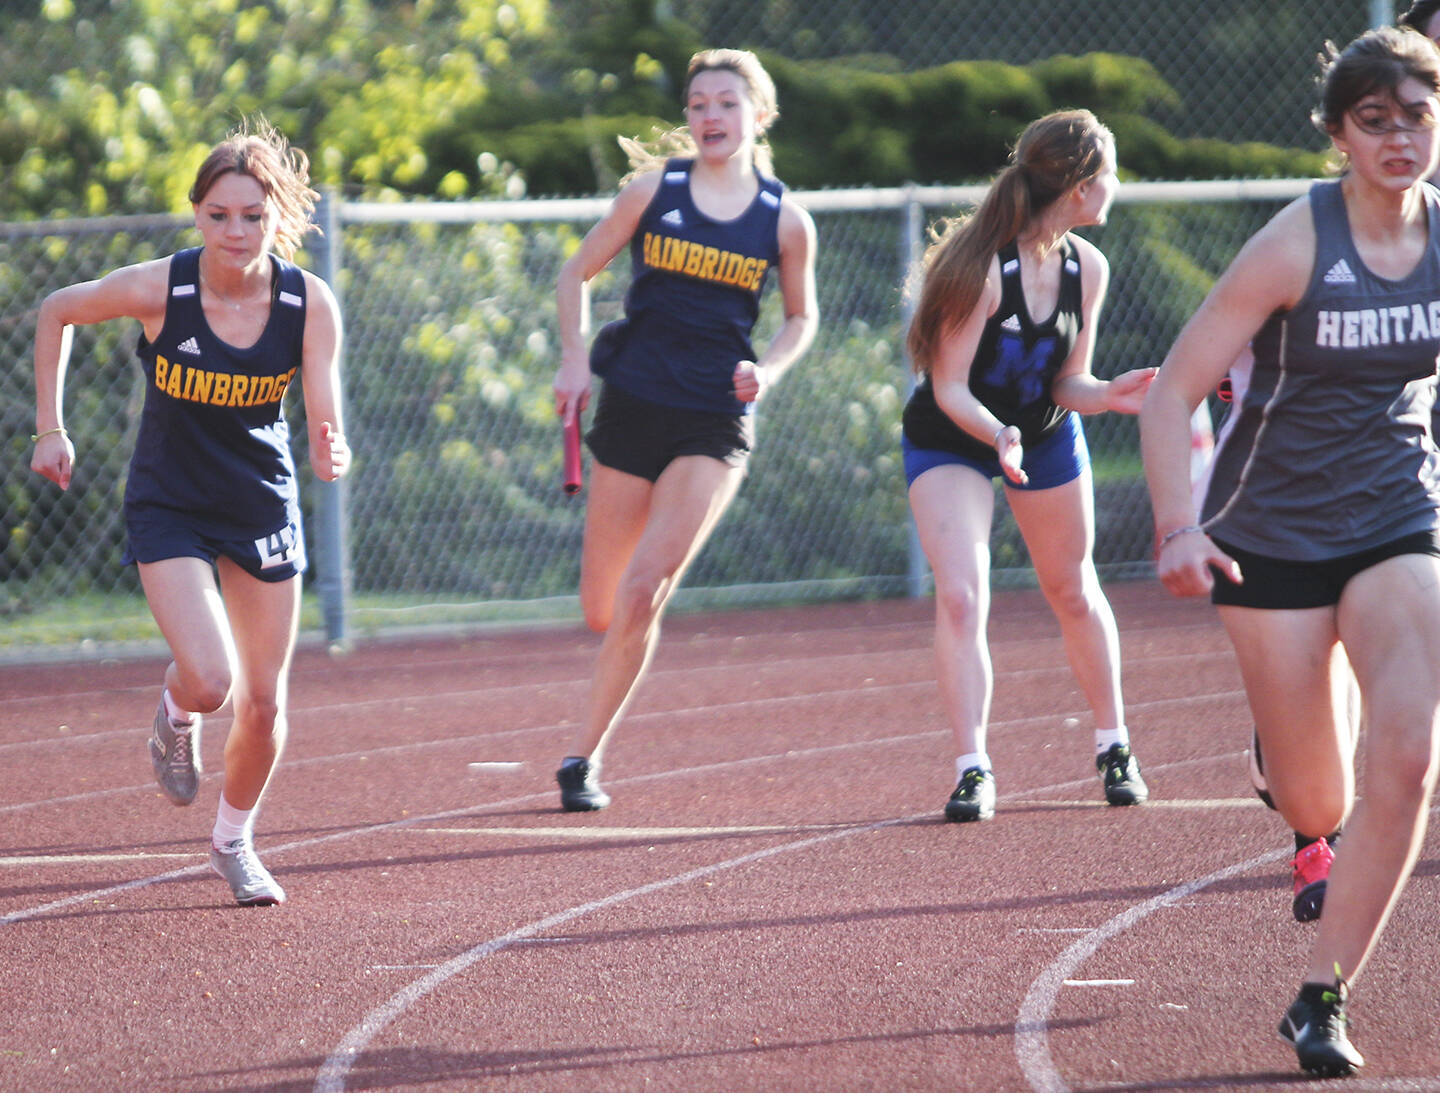 Spartan Claire Hungerford takes off as teammate Clara Maclise races to pass the baton to her on the 4 by 100 relay.